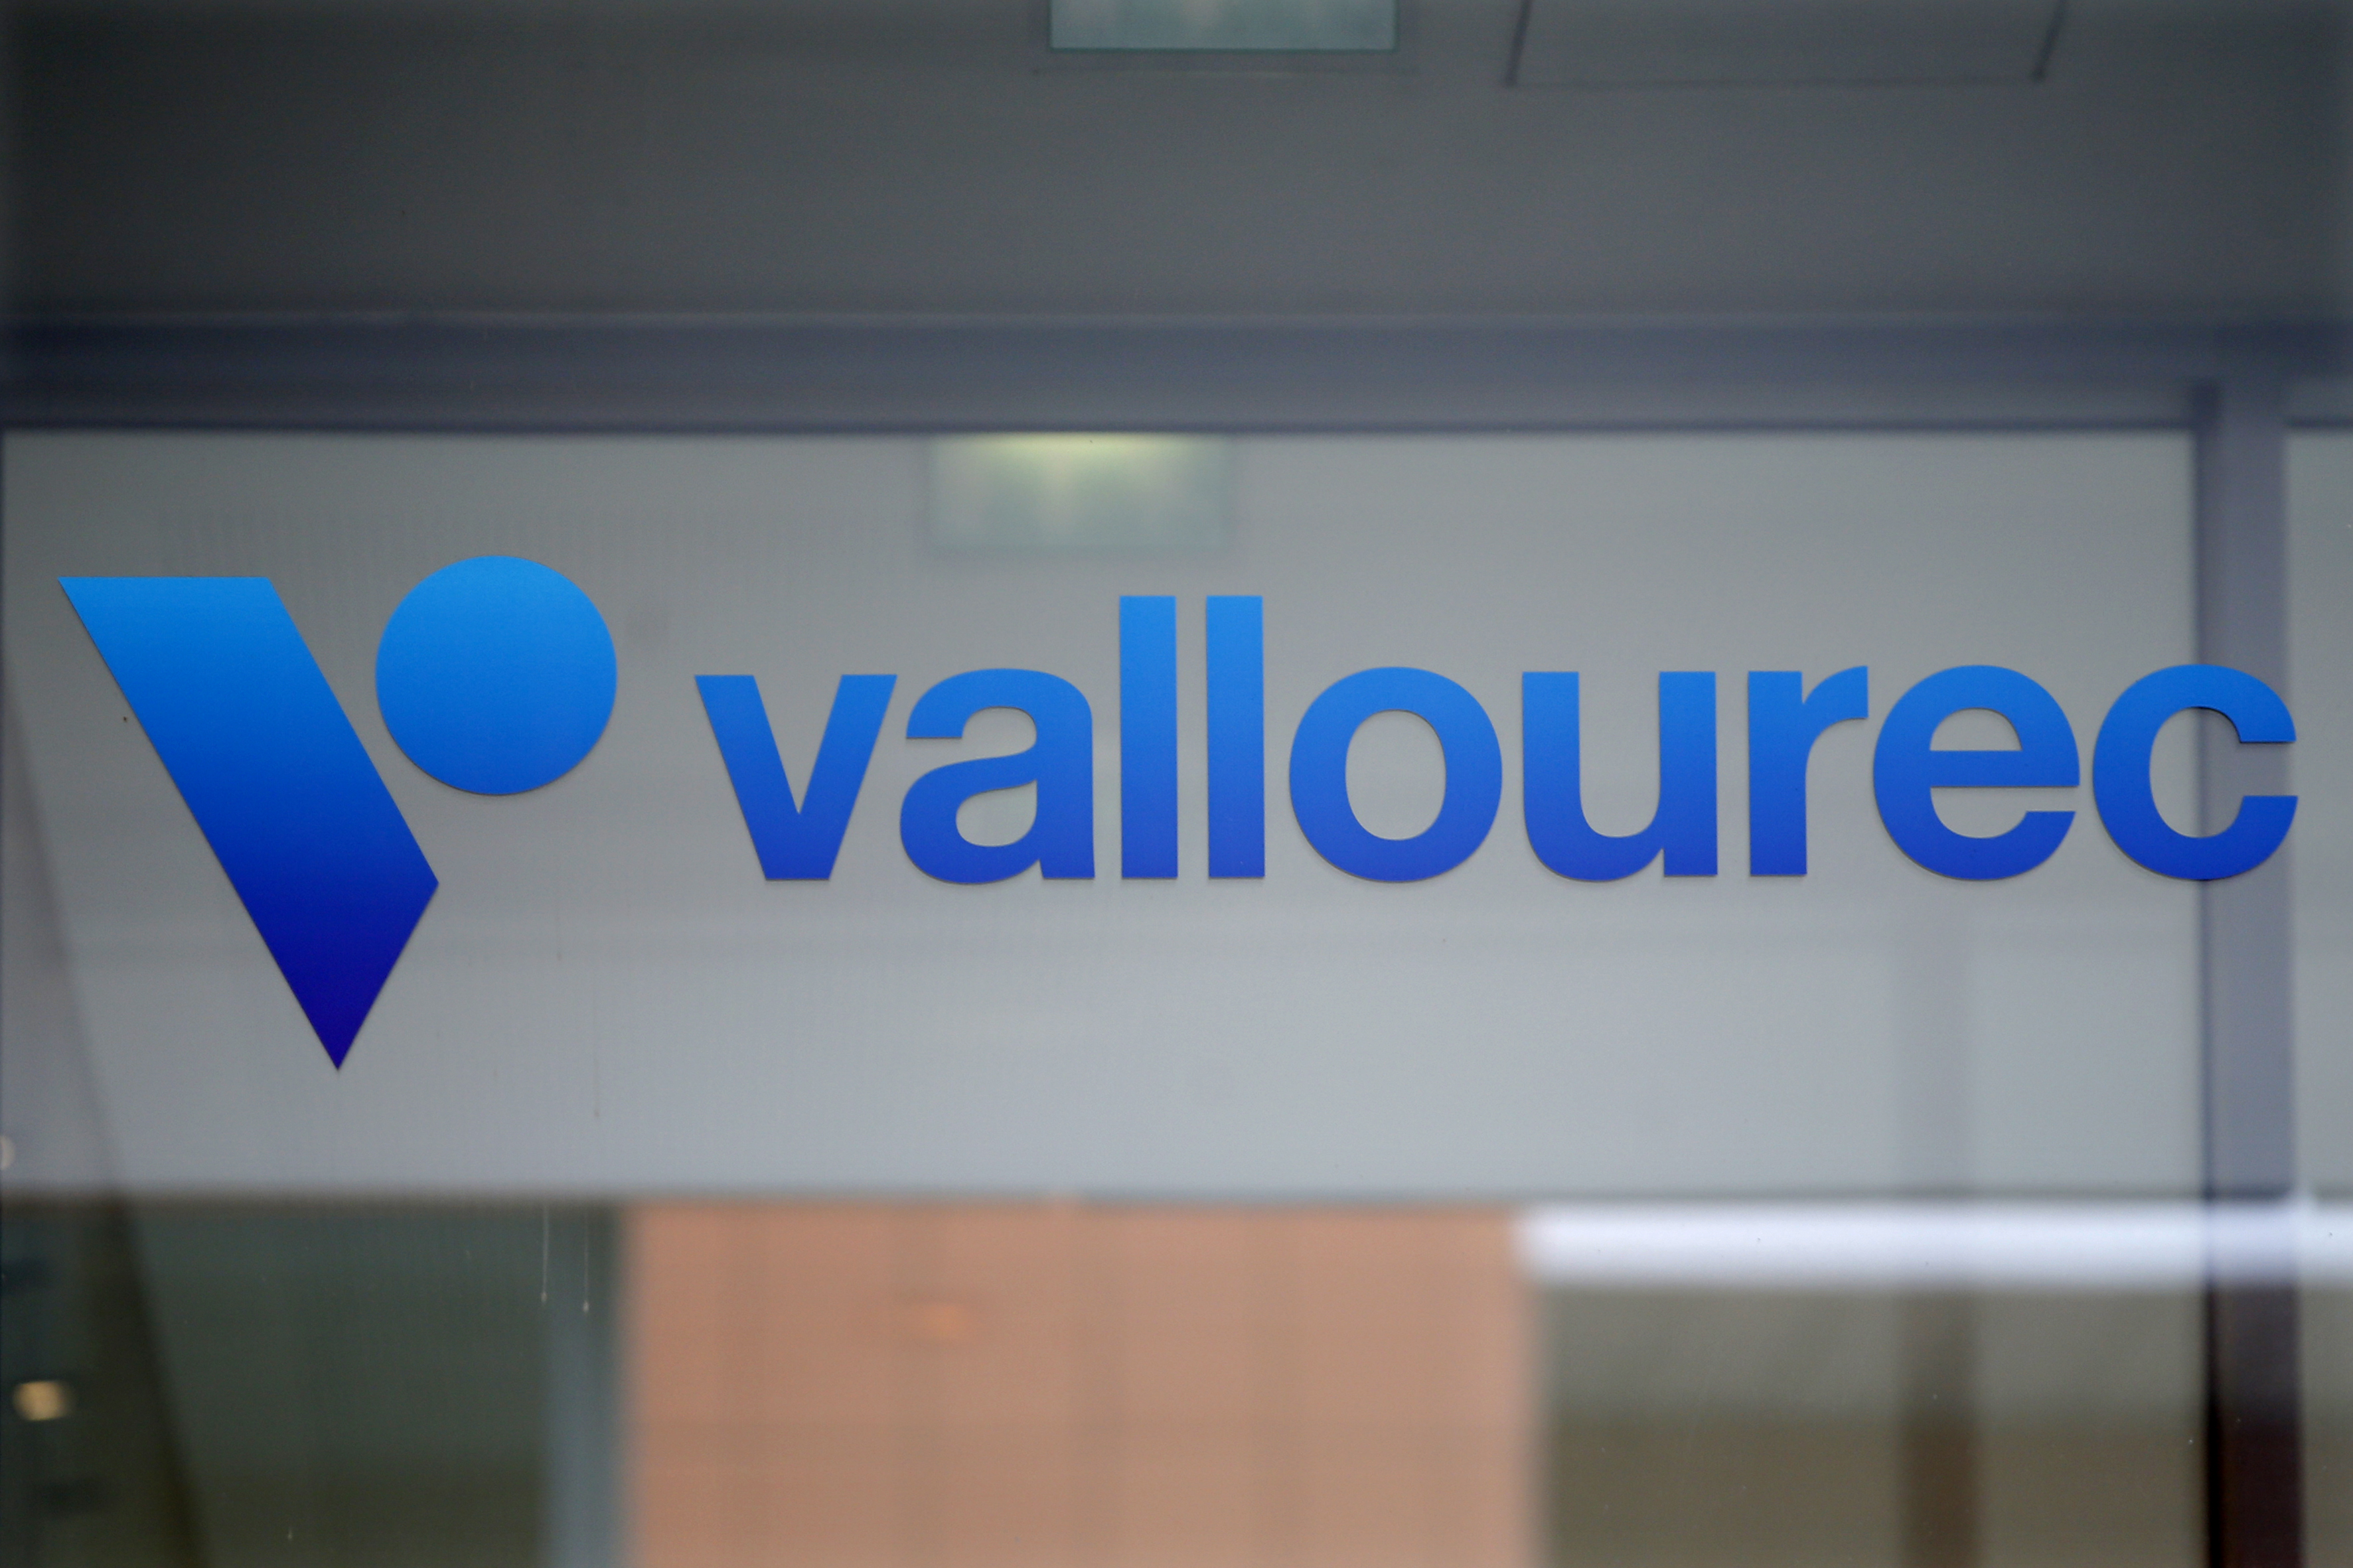 The company's logo is seen on top of the entrance of French oil industry tubing maker Vallourec at Boulogne-Billancourt, near Paris